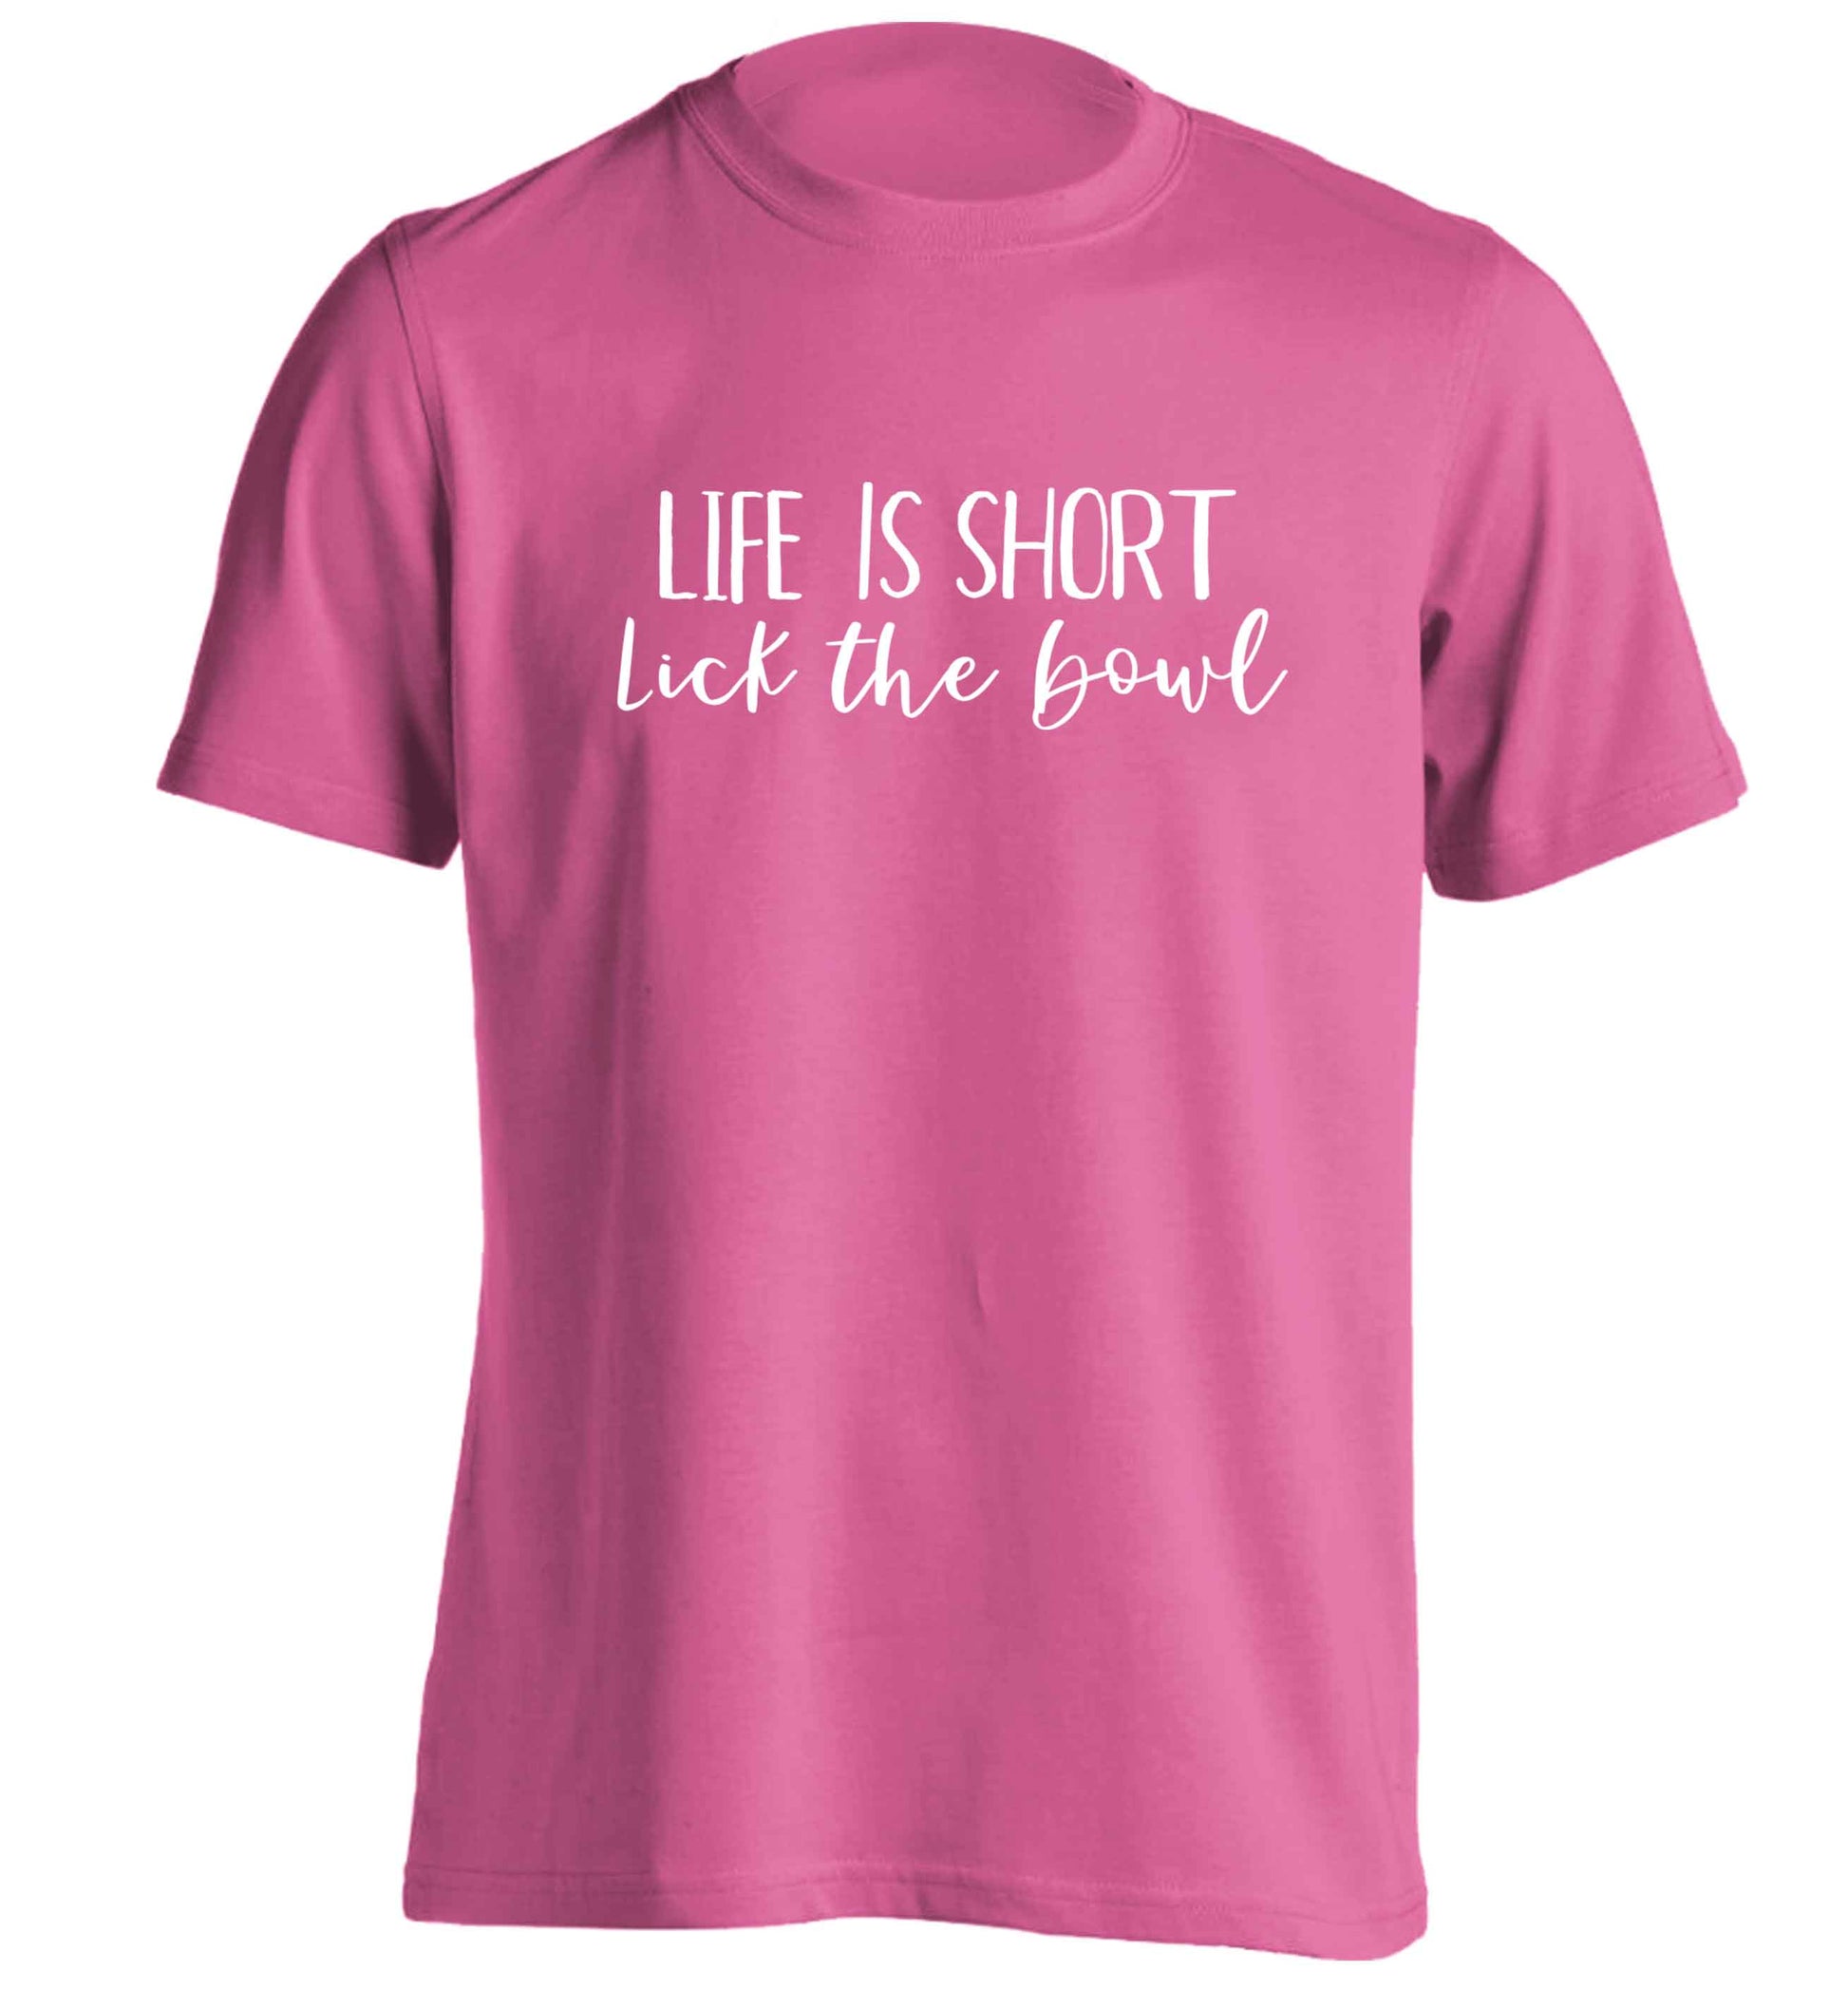 Life is short lick the bowl adults unisex pink Tshirt 2XL